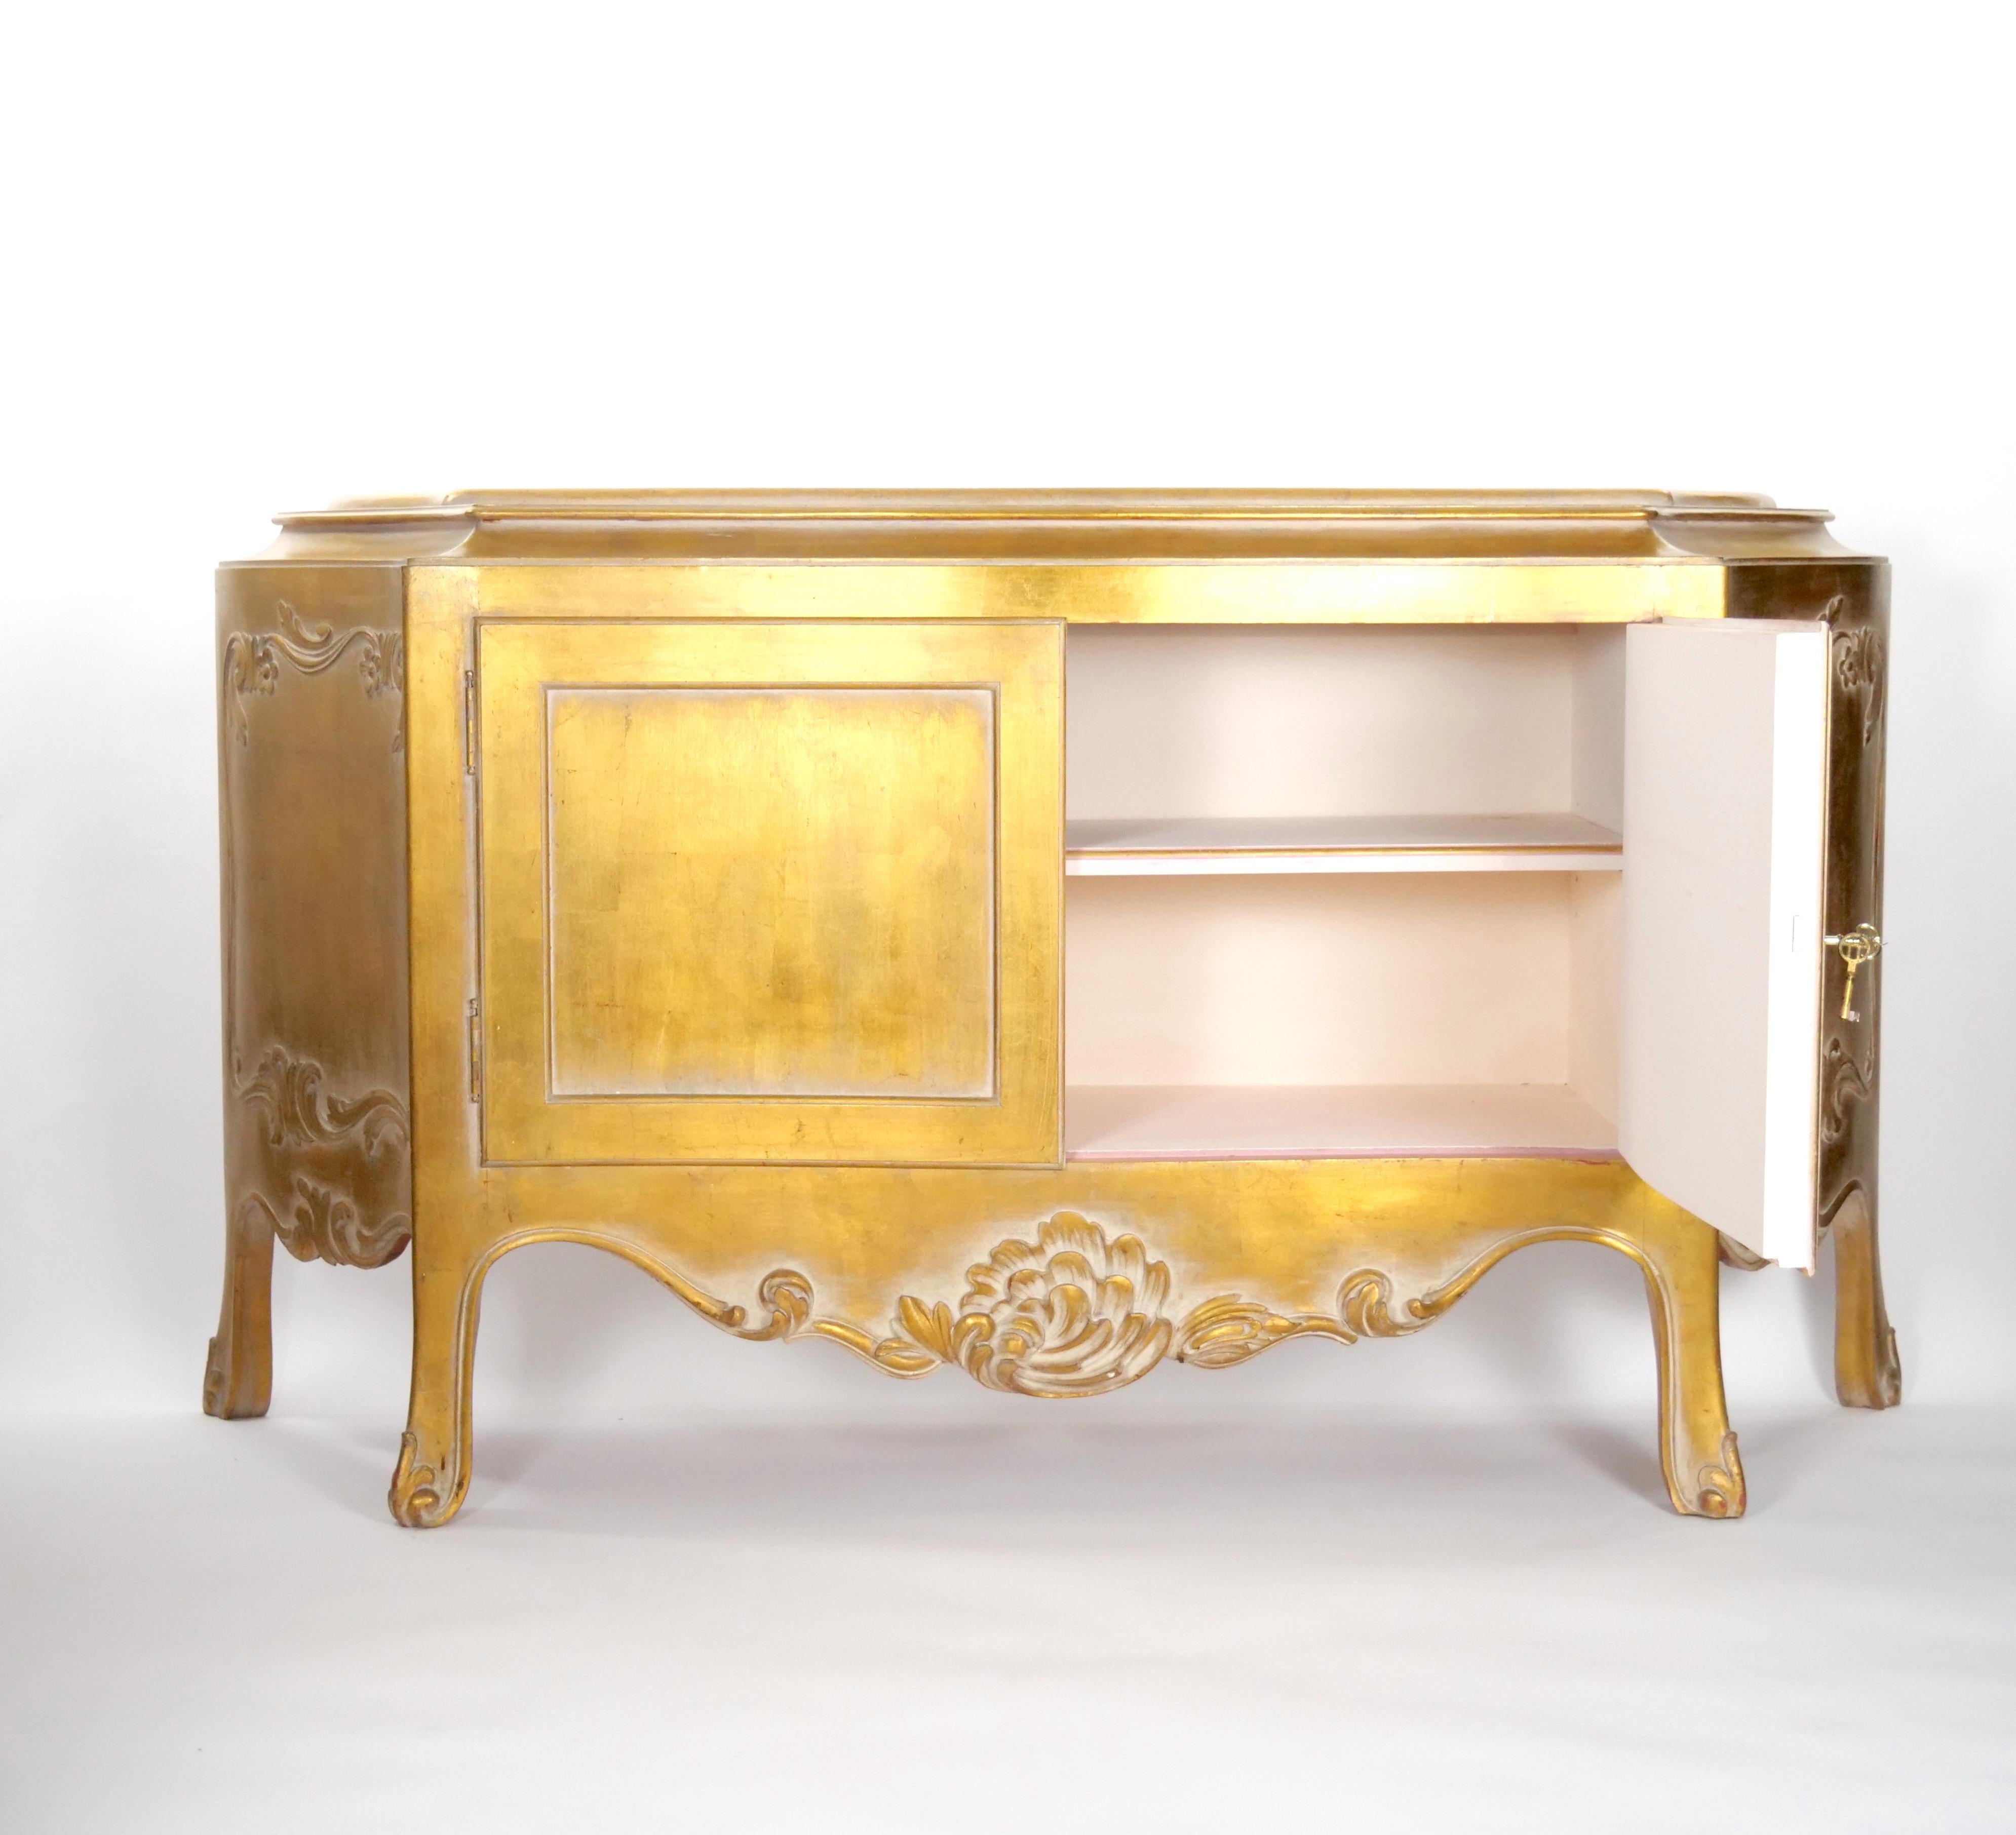 Wood Hand Carved Gilt Gold Painted Exterior Two Part Display Cabinet For Sale